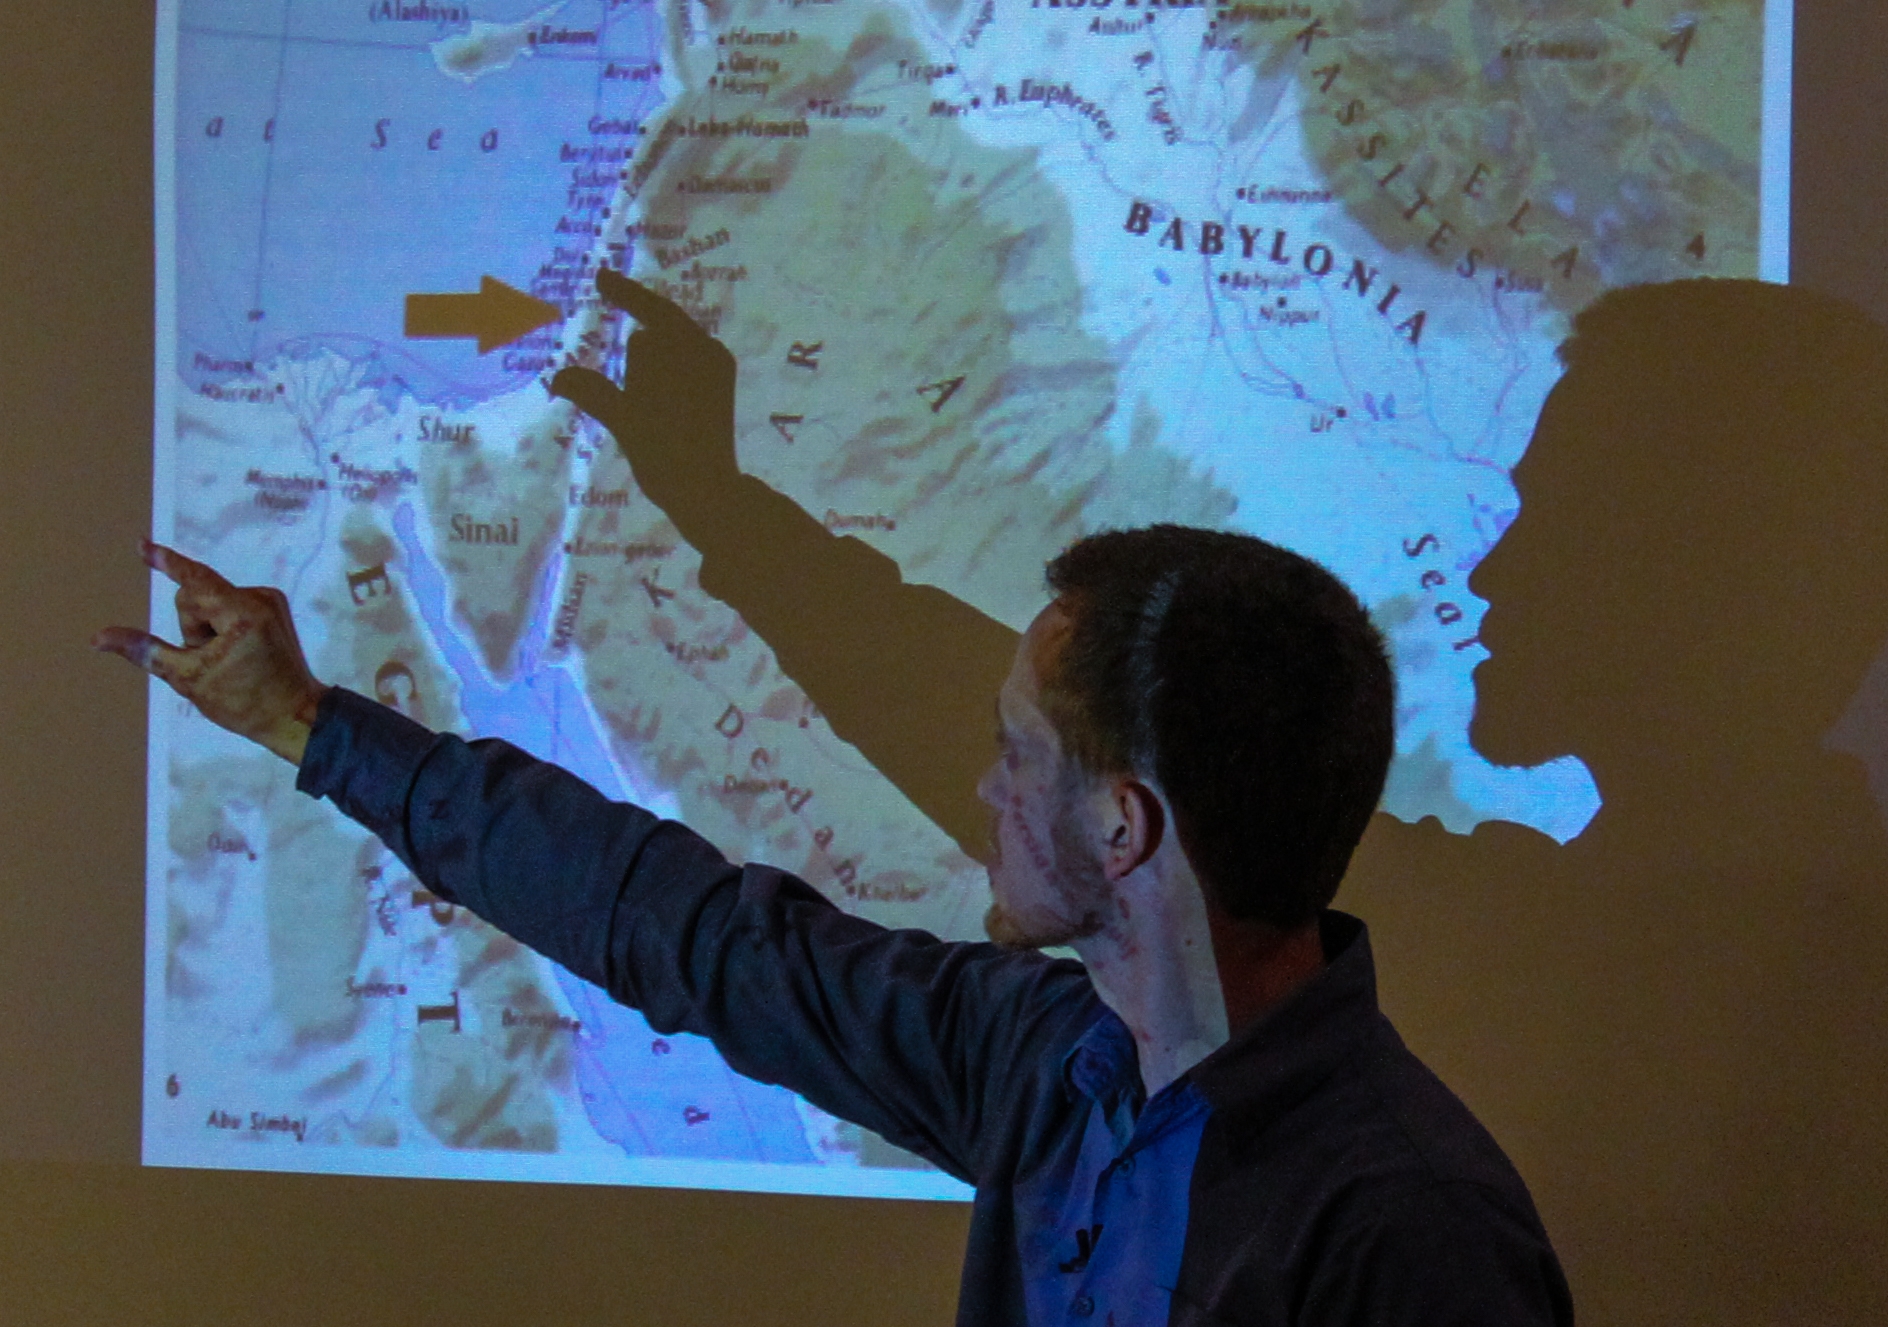 Brandon uses a shadow to indicate the size of Israel.